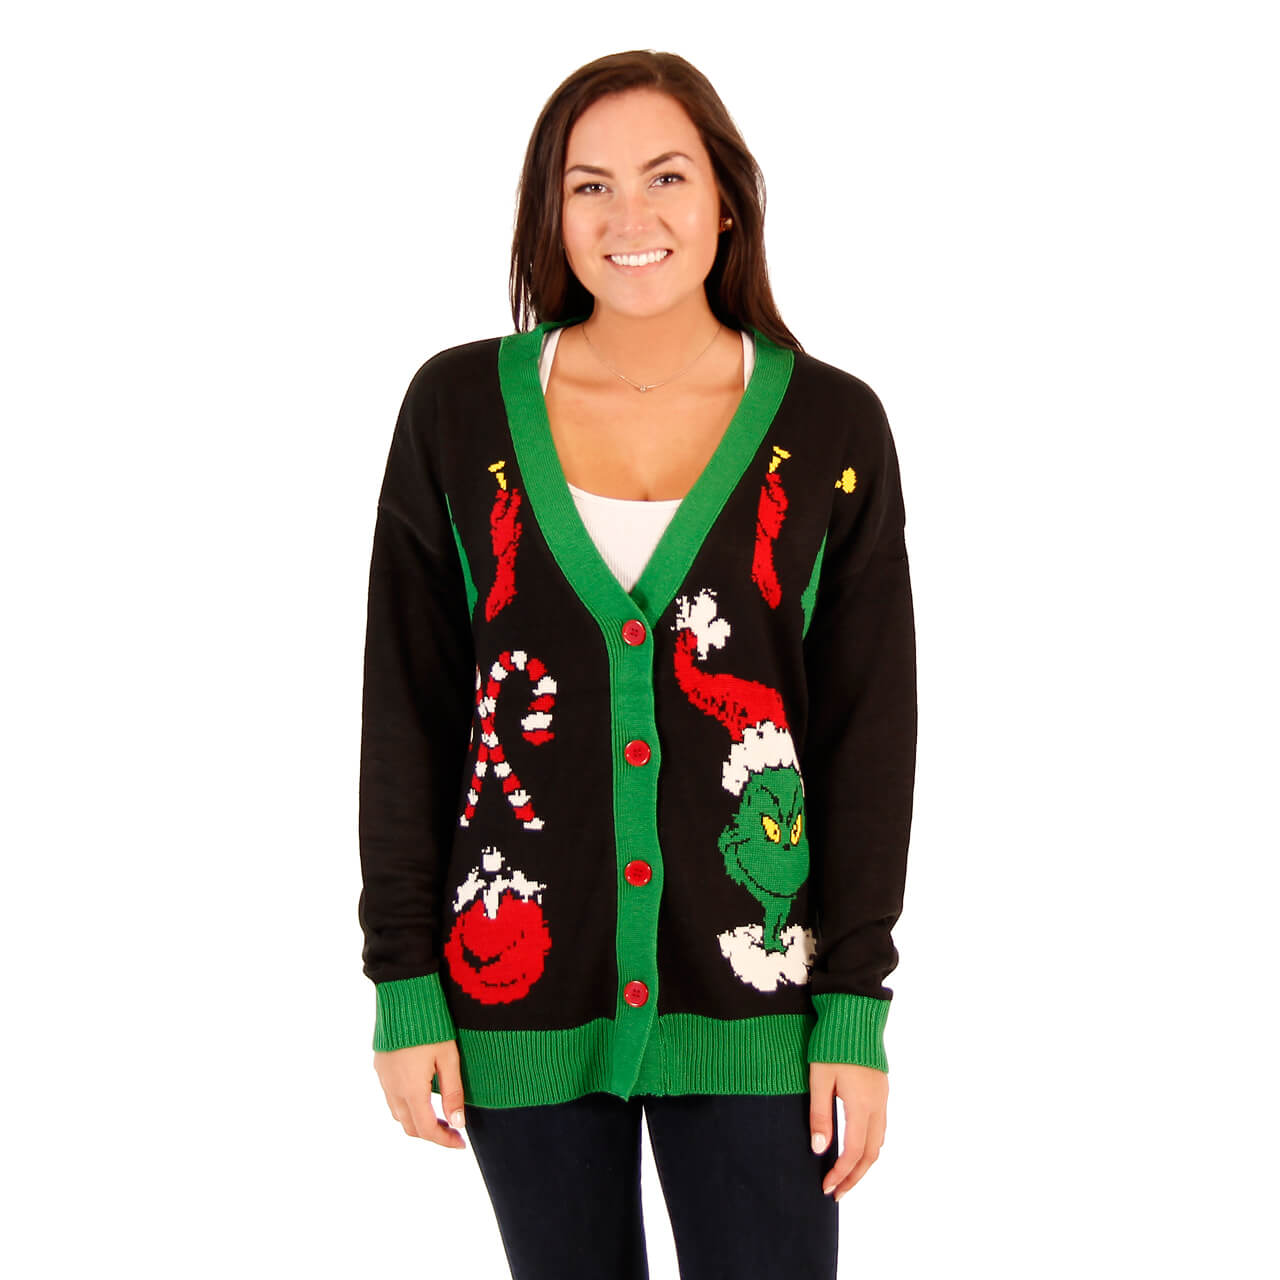 Women's The Grinch Ugly Christmas Cardigan Sweater